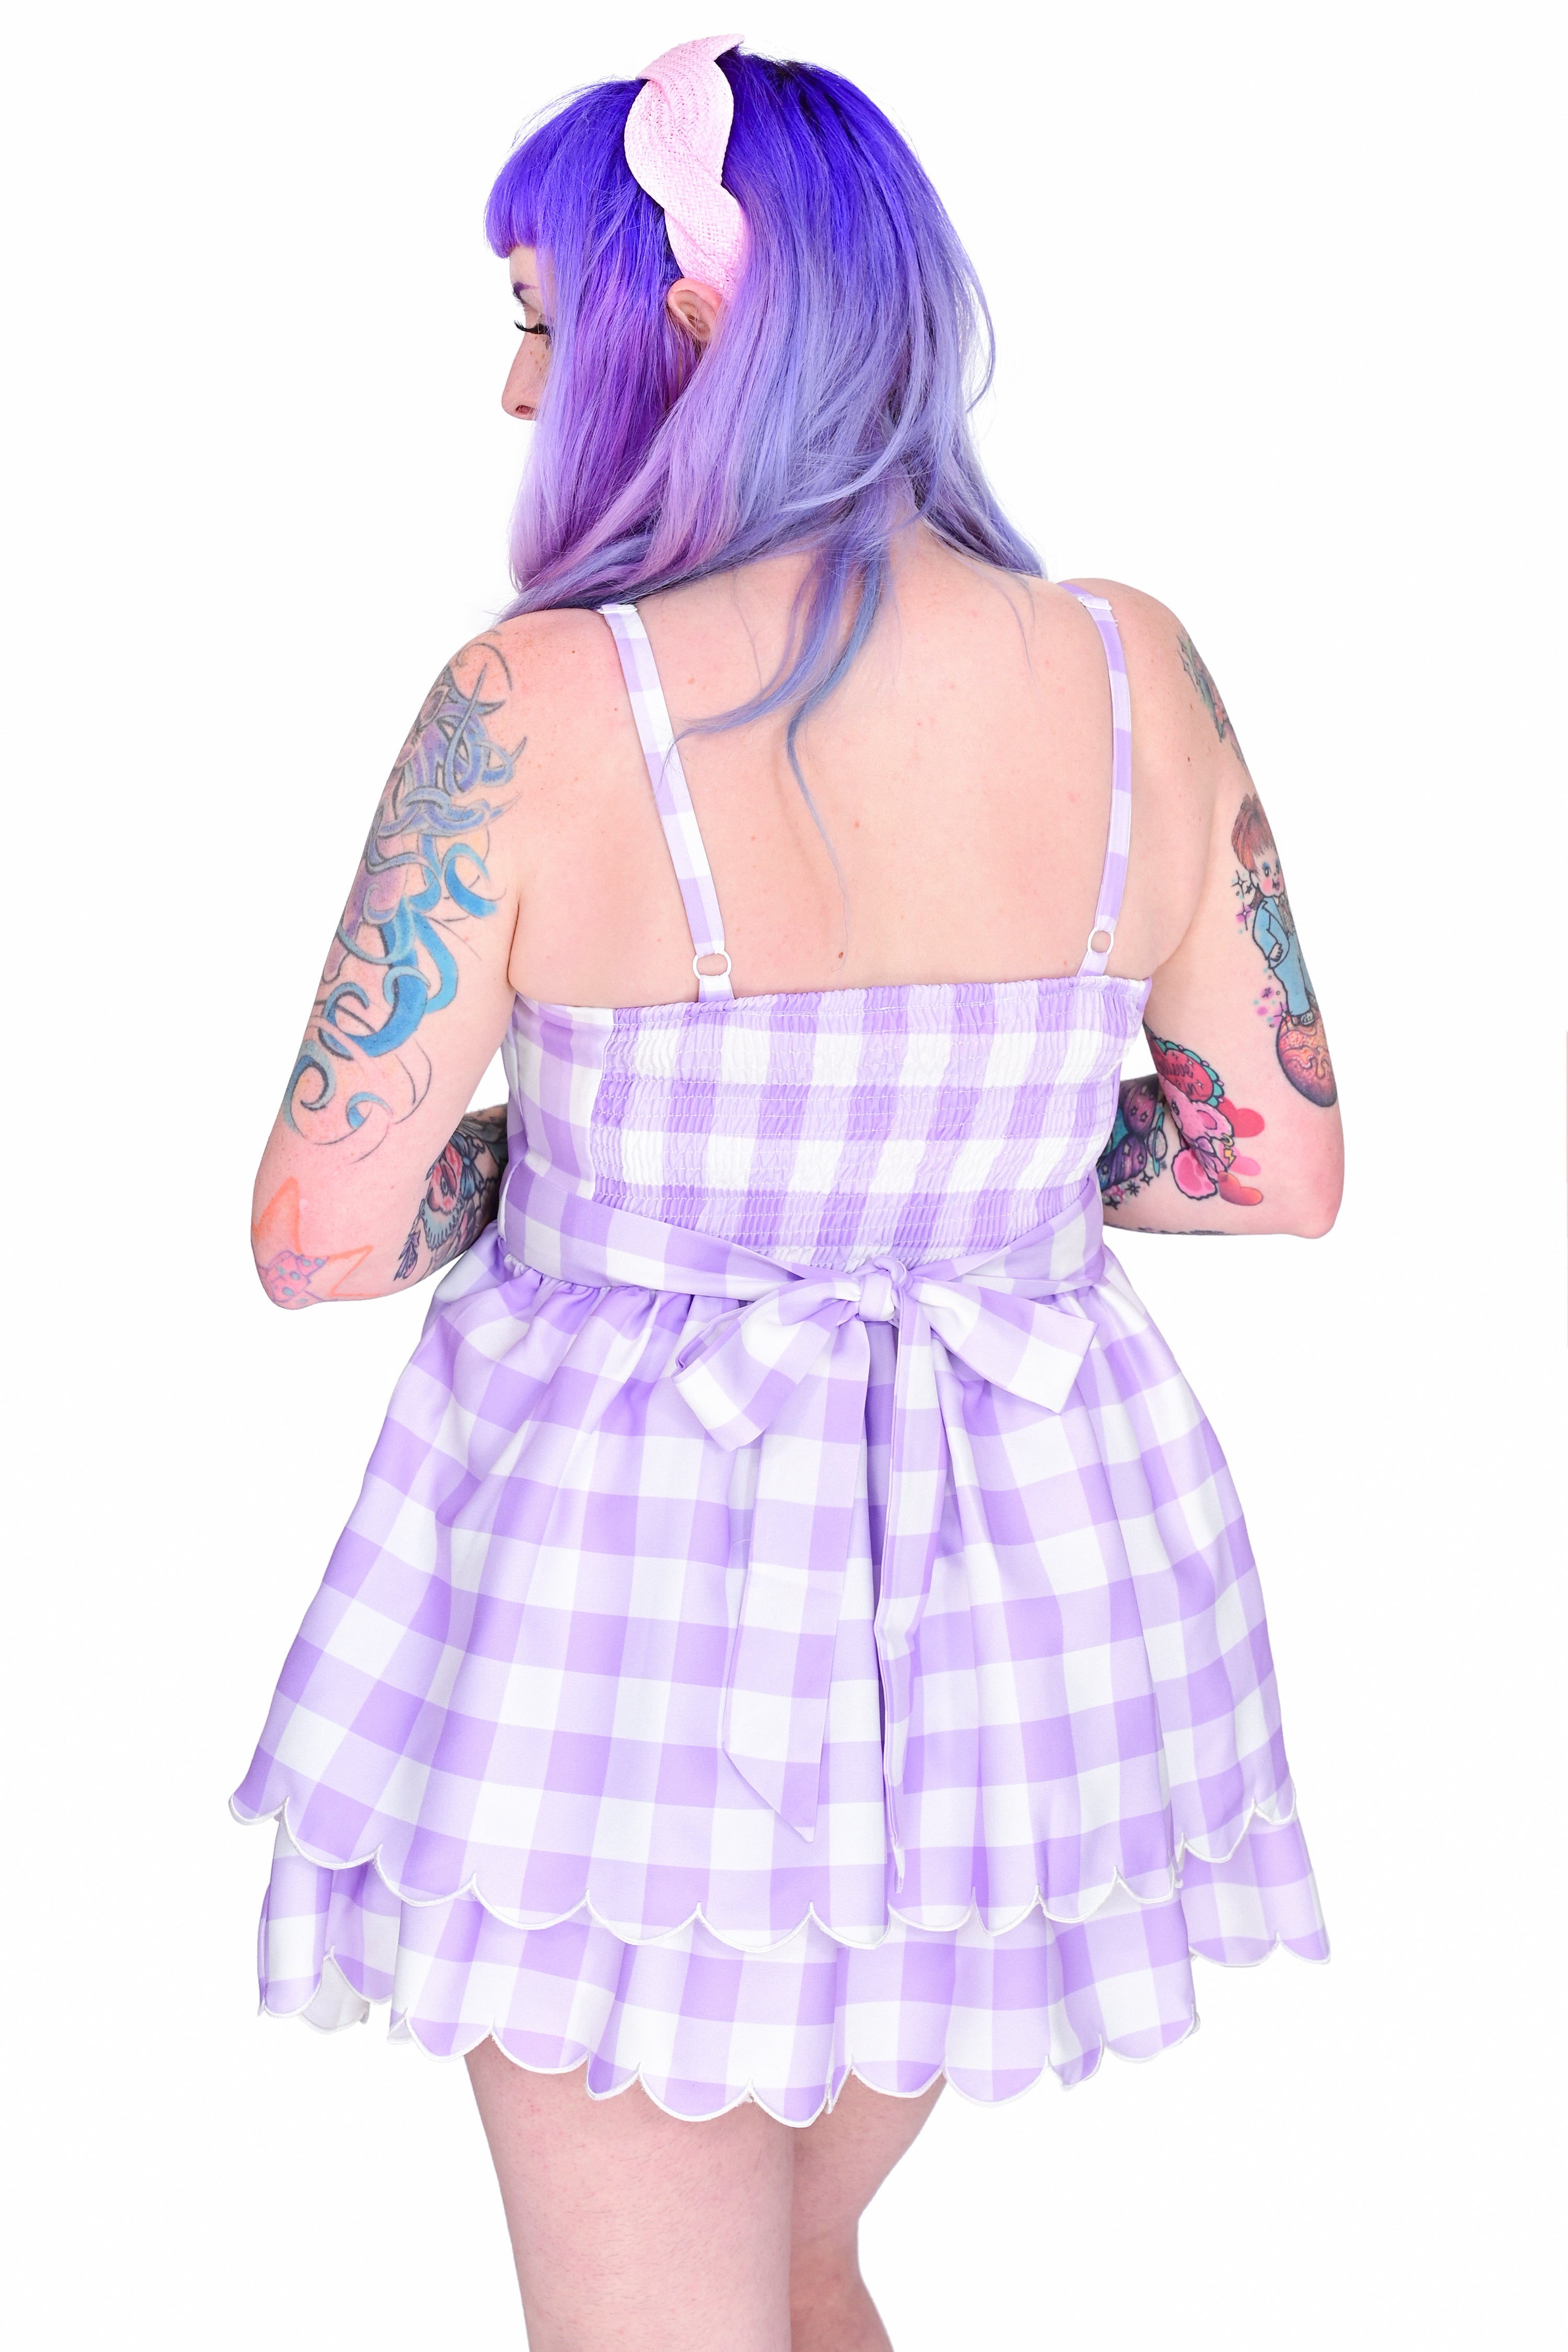 Best Day Ever Dress - Lavender - Size Small left!